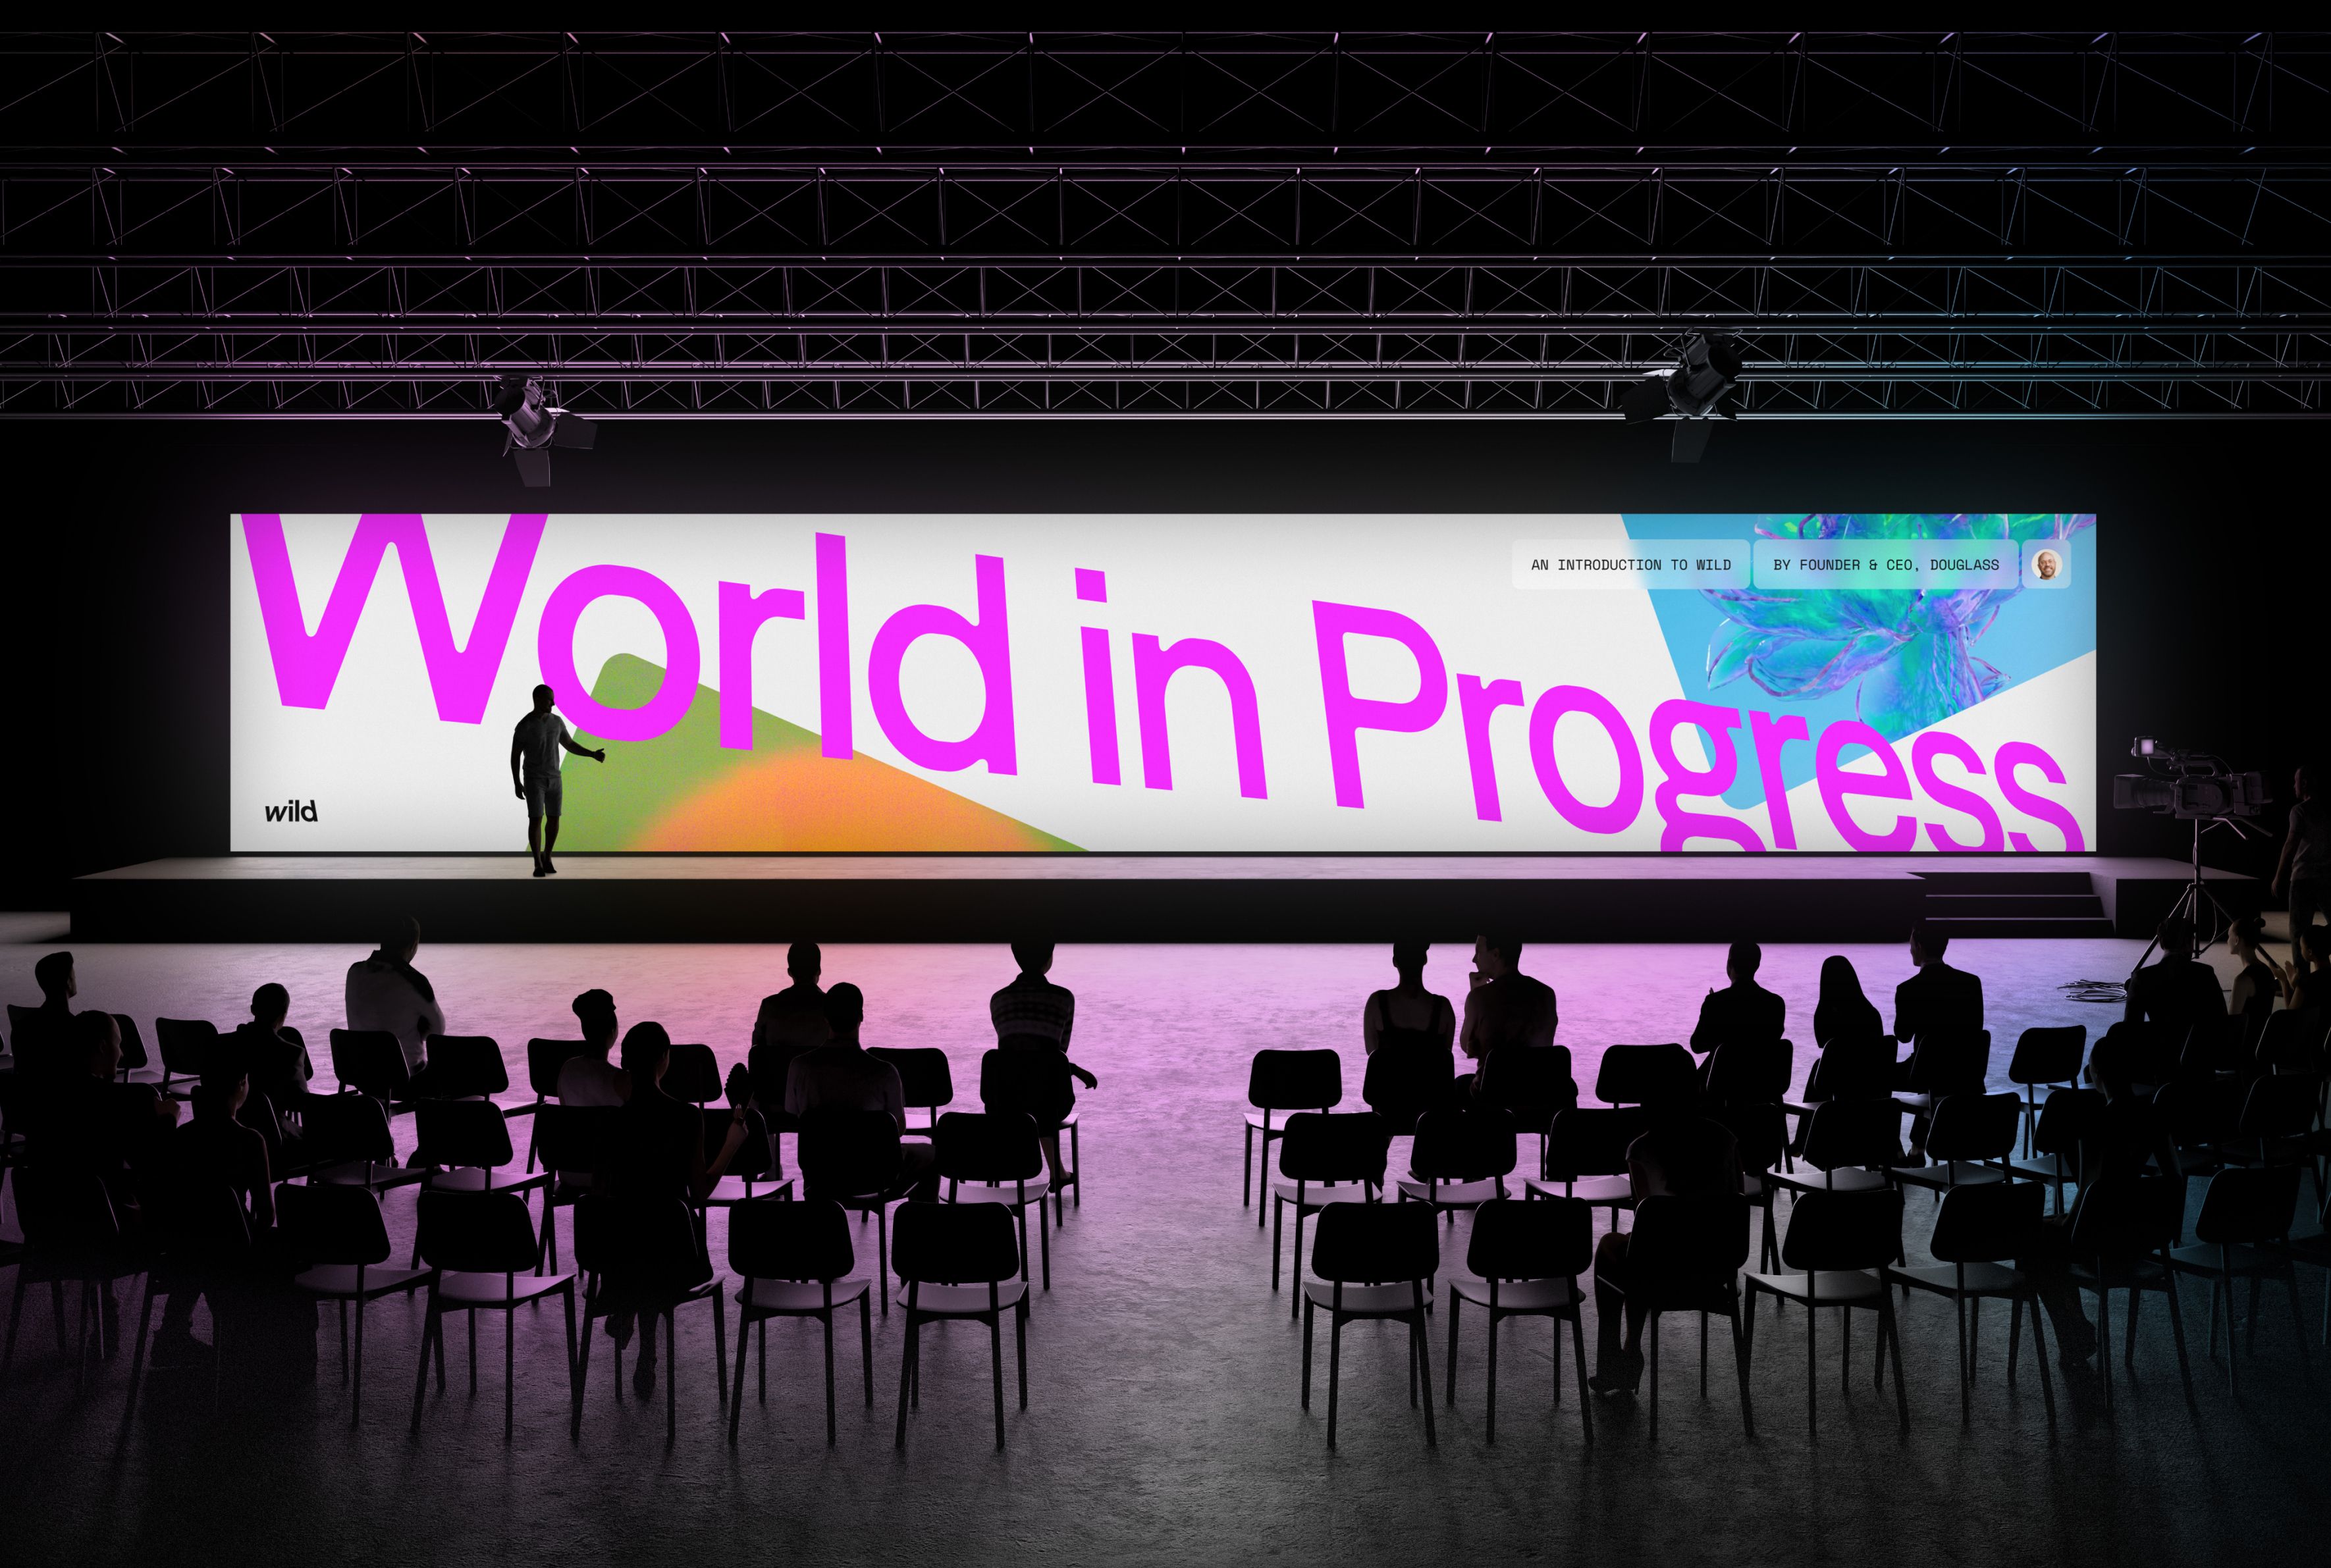 conference screen showing Wild world in progress title